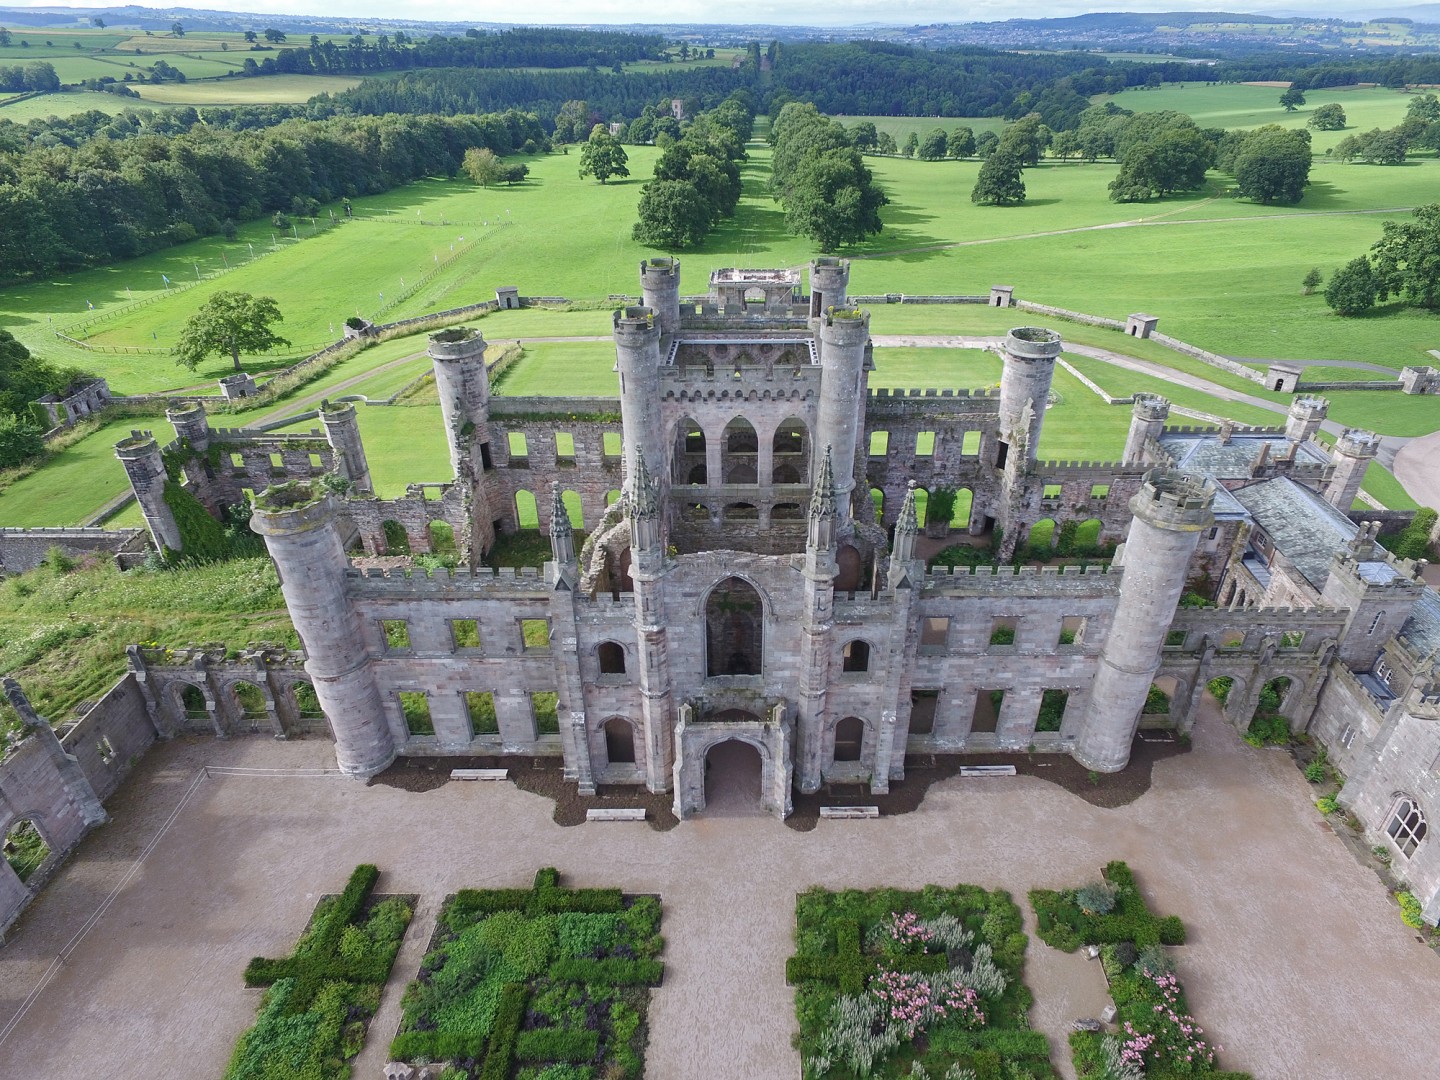 The Borders, Lowther Castle, Penrith, Lake District, Cumbria - Aerial view Lowther Castle